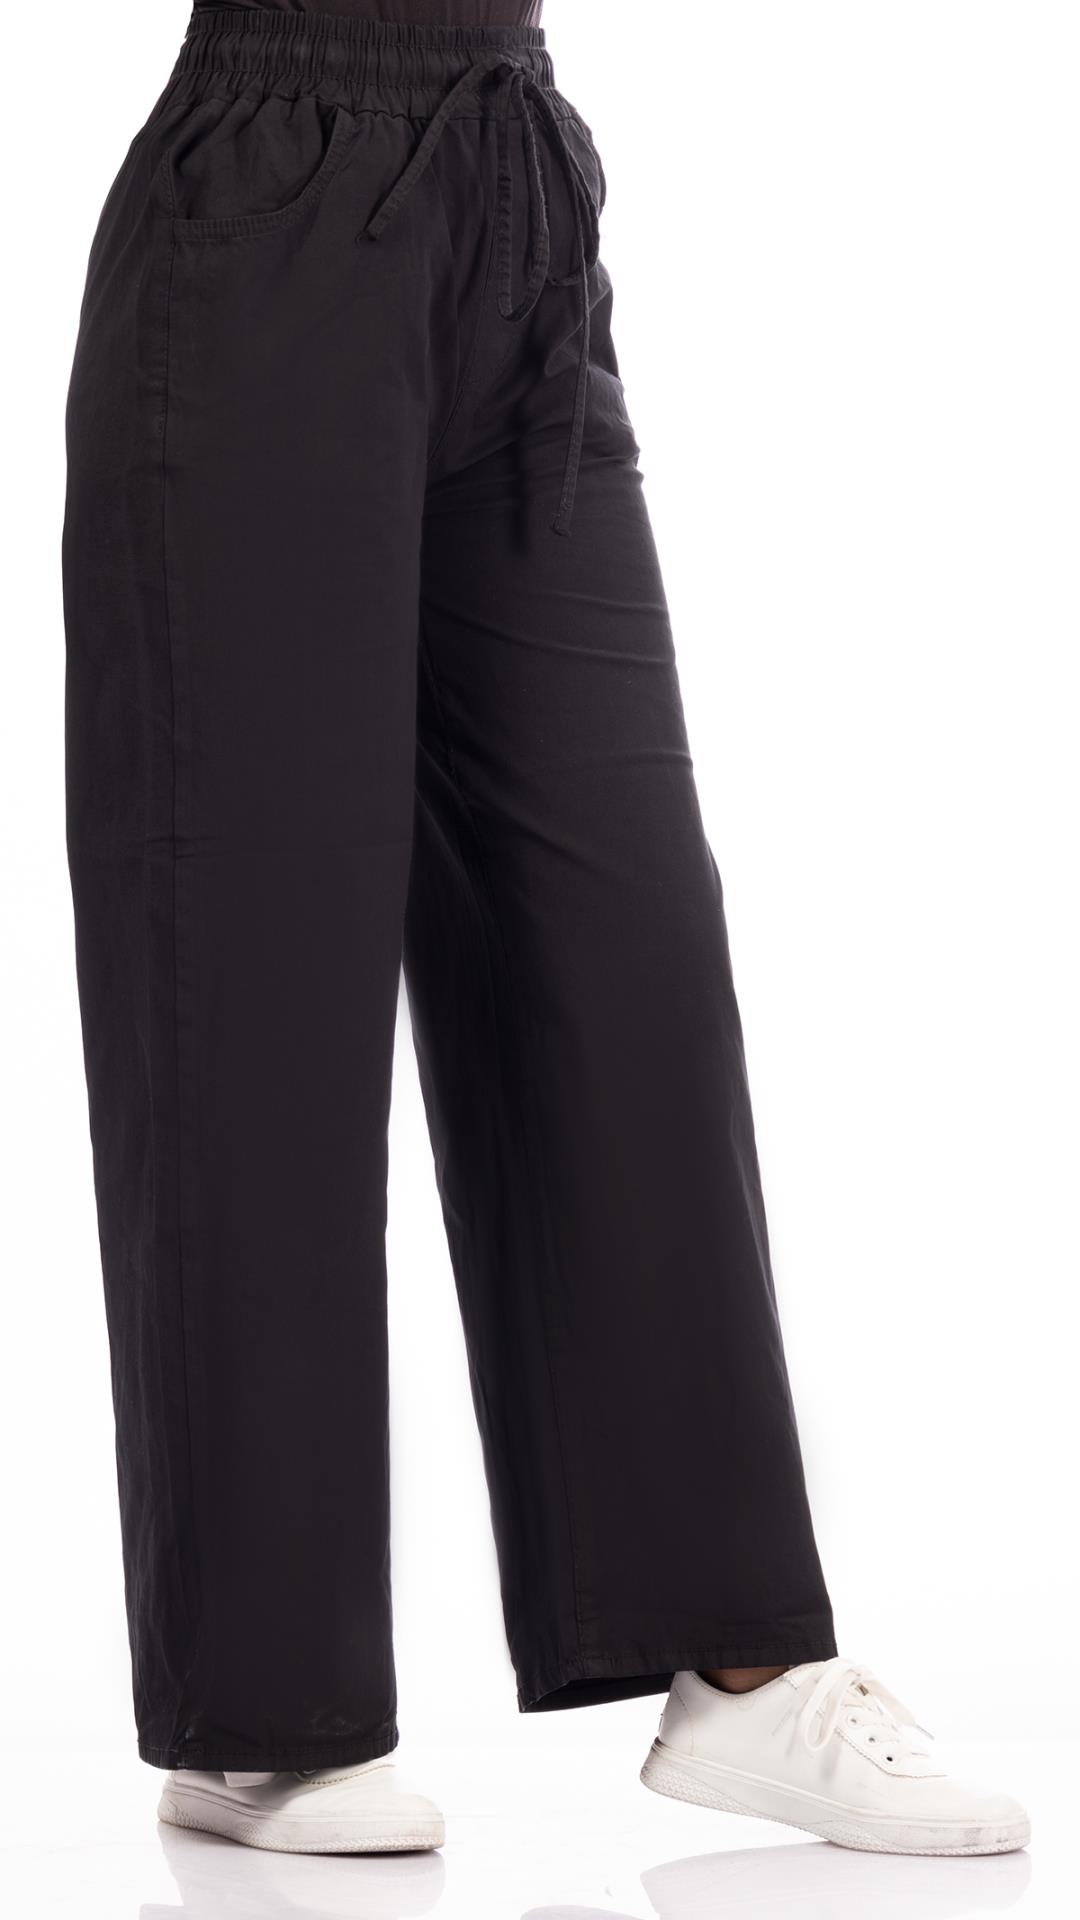 Linen trousers with a distinctive material